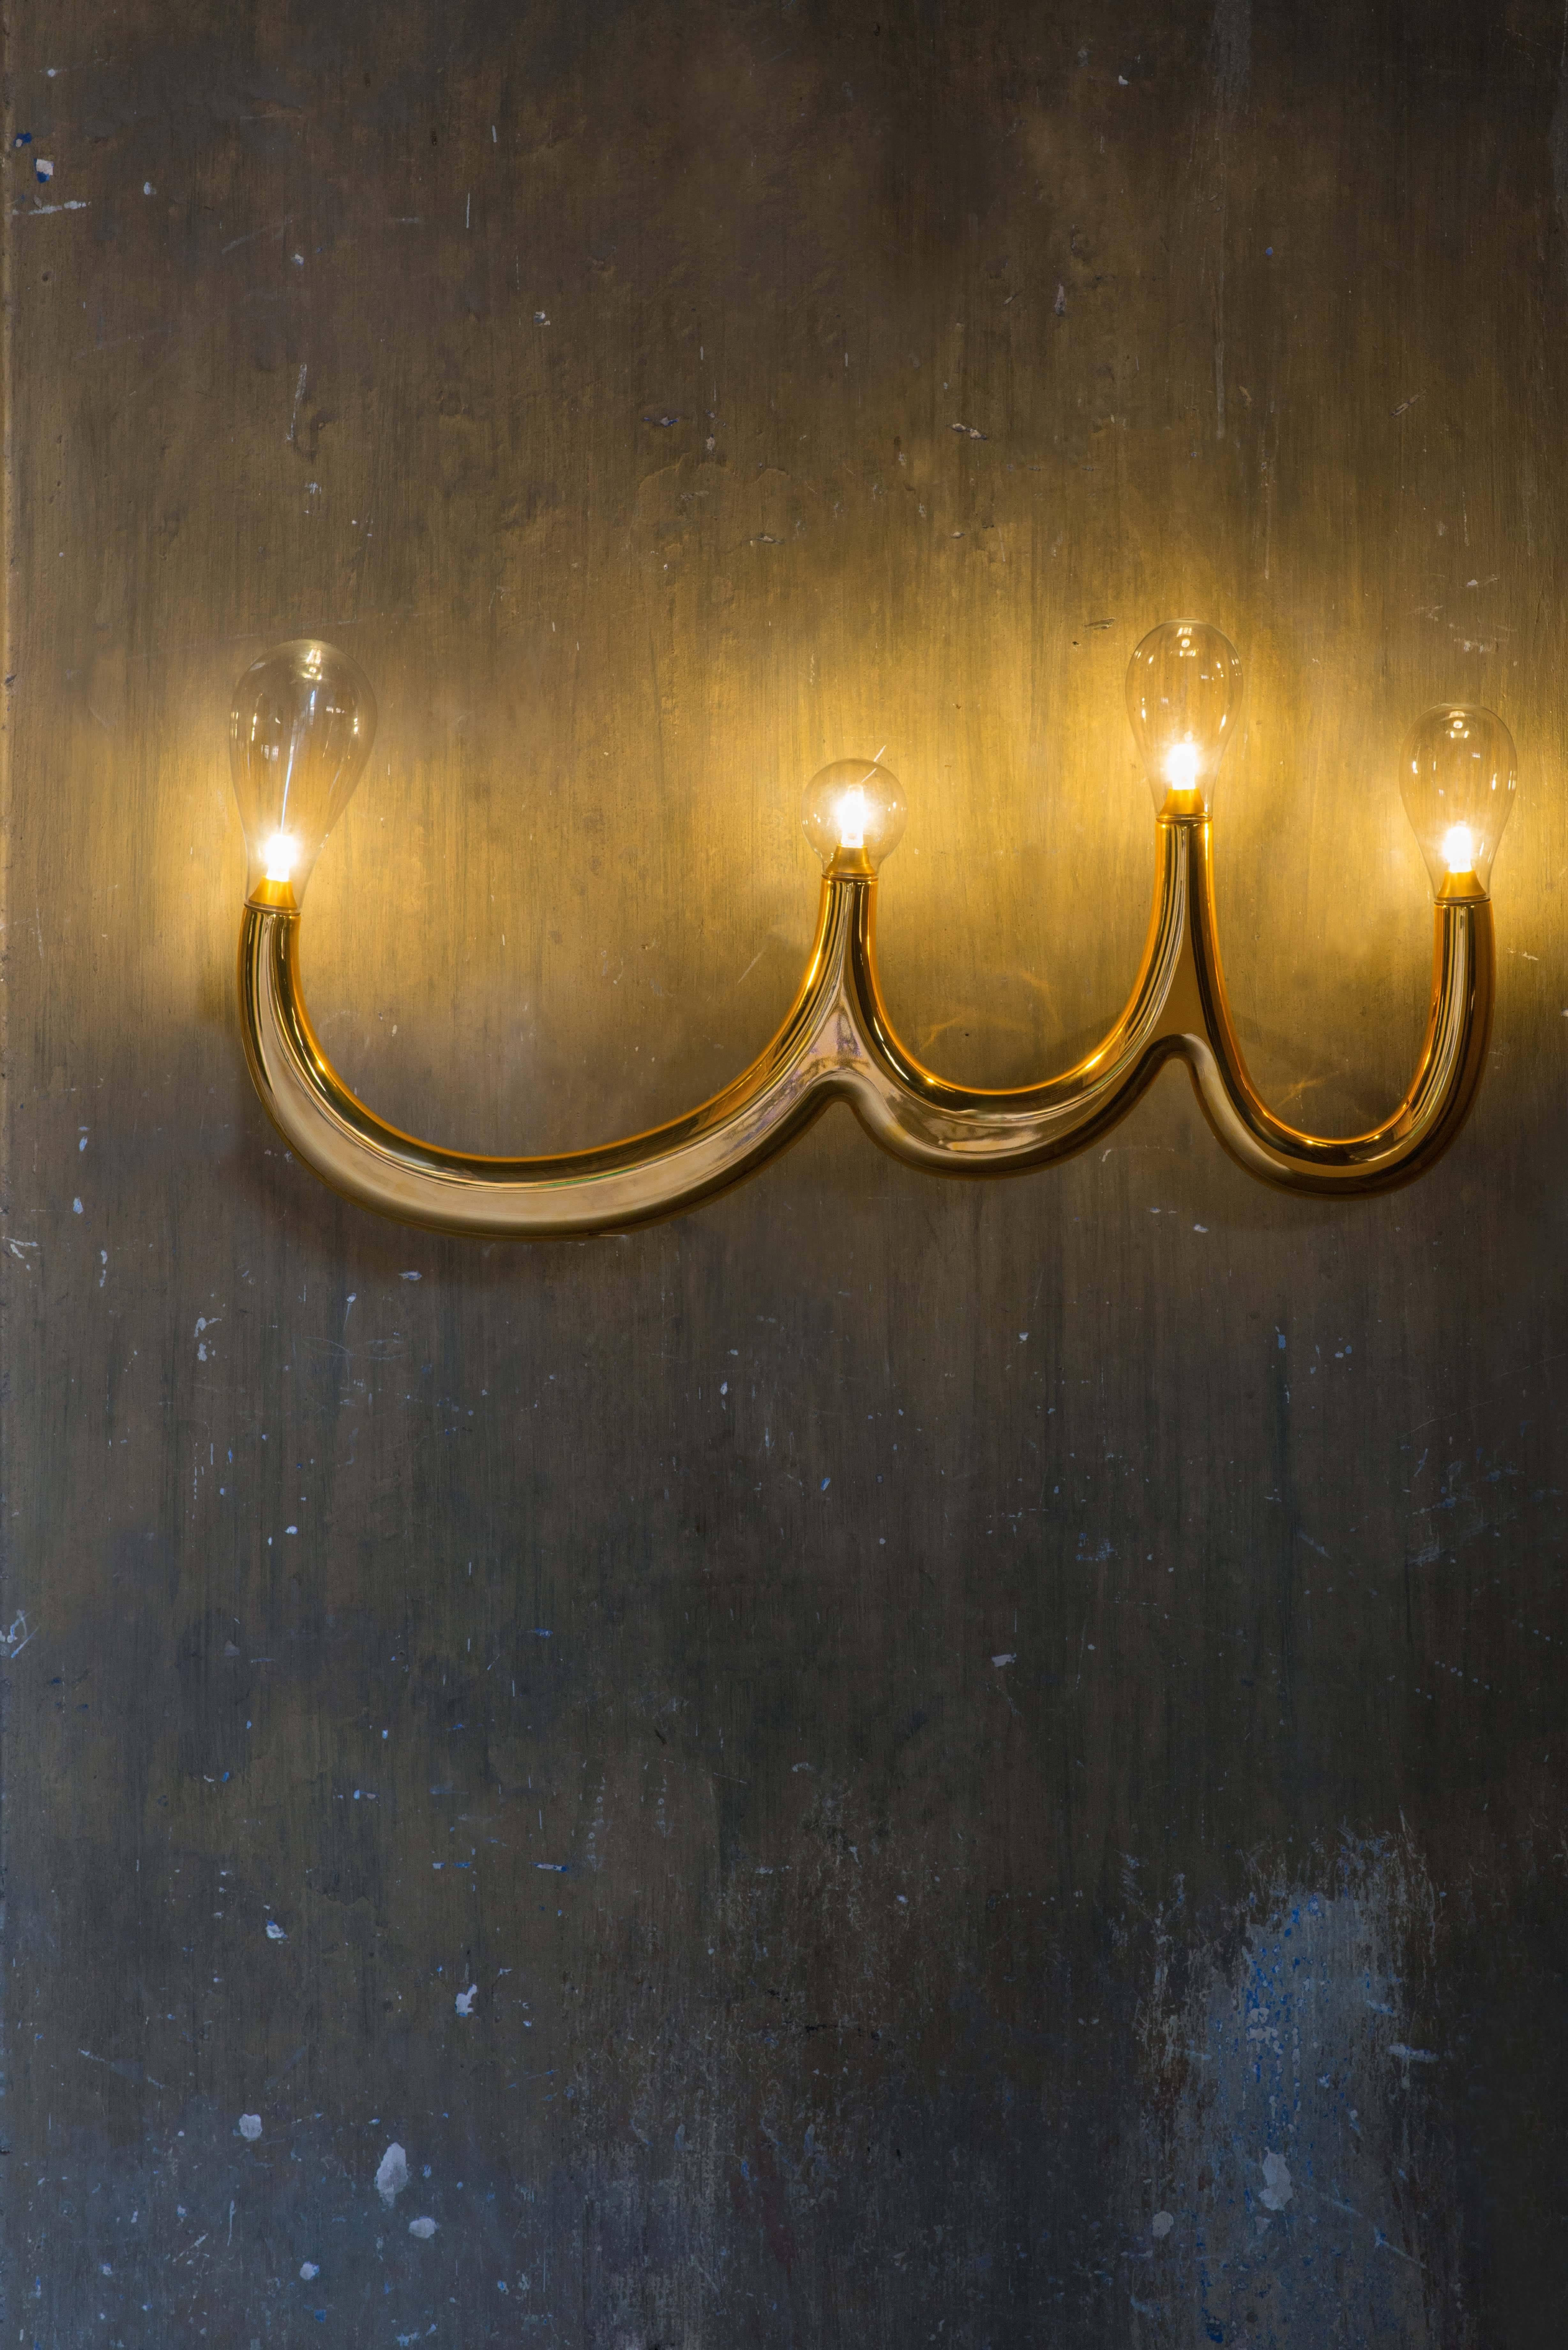 The four bulb wall light created by Matteo Cibic for Scarlet Splendour

The light collection, Luce Naga, captures the fluidity of the serpent’s movement in fine ceramic. The lights are dramatic, never subtle yet Classic in their form and crafted